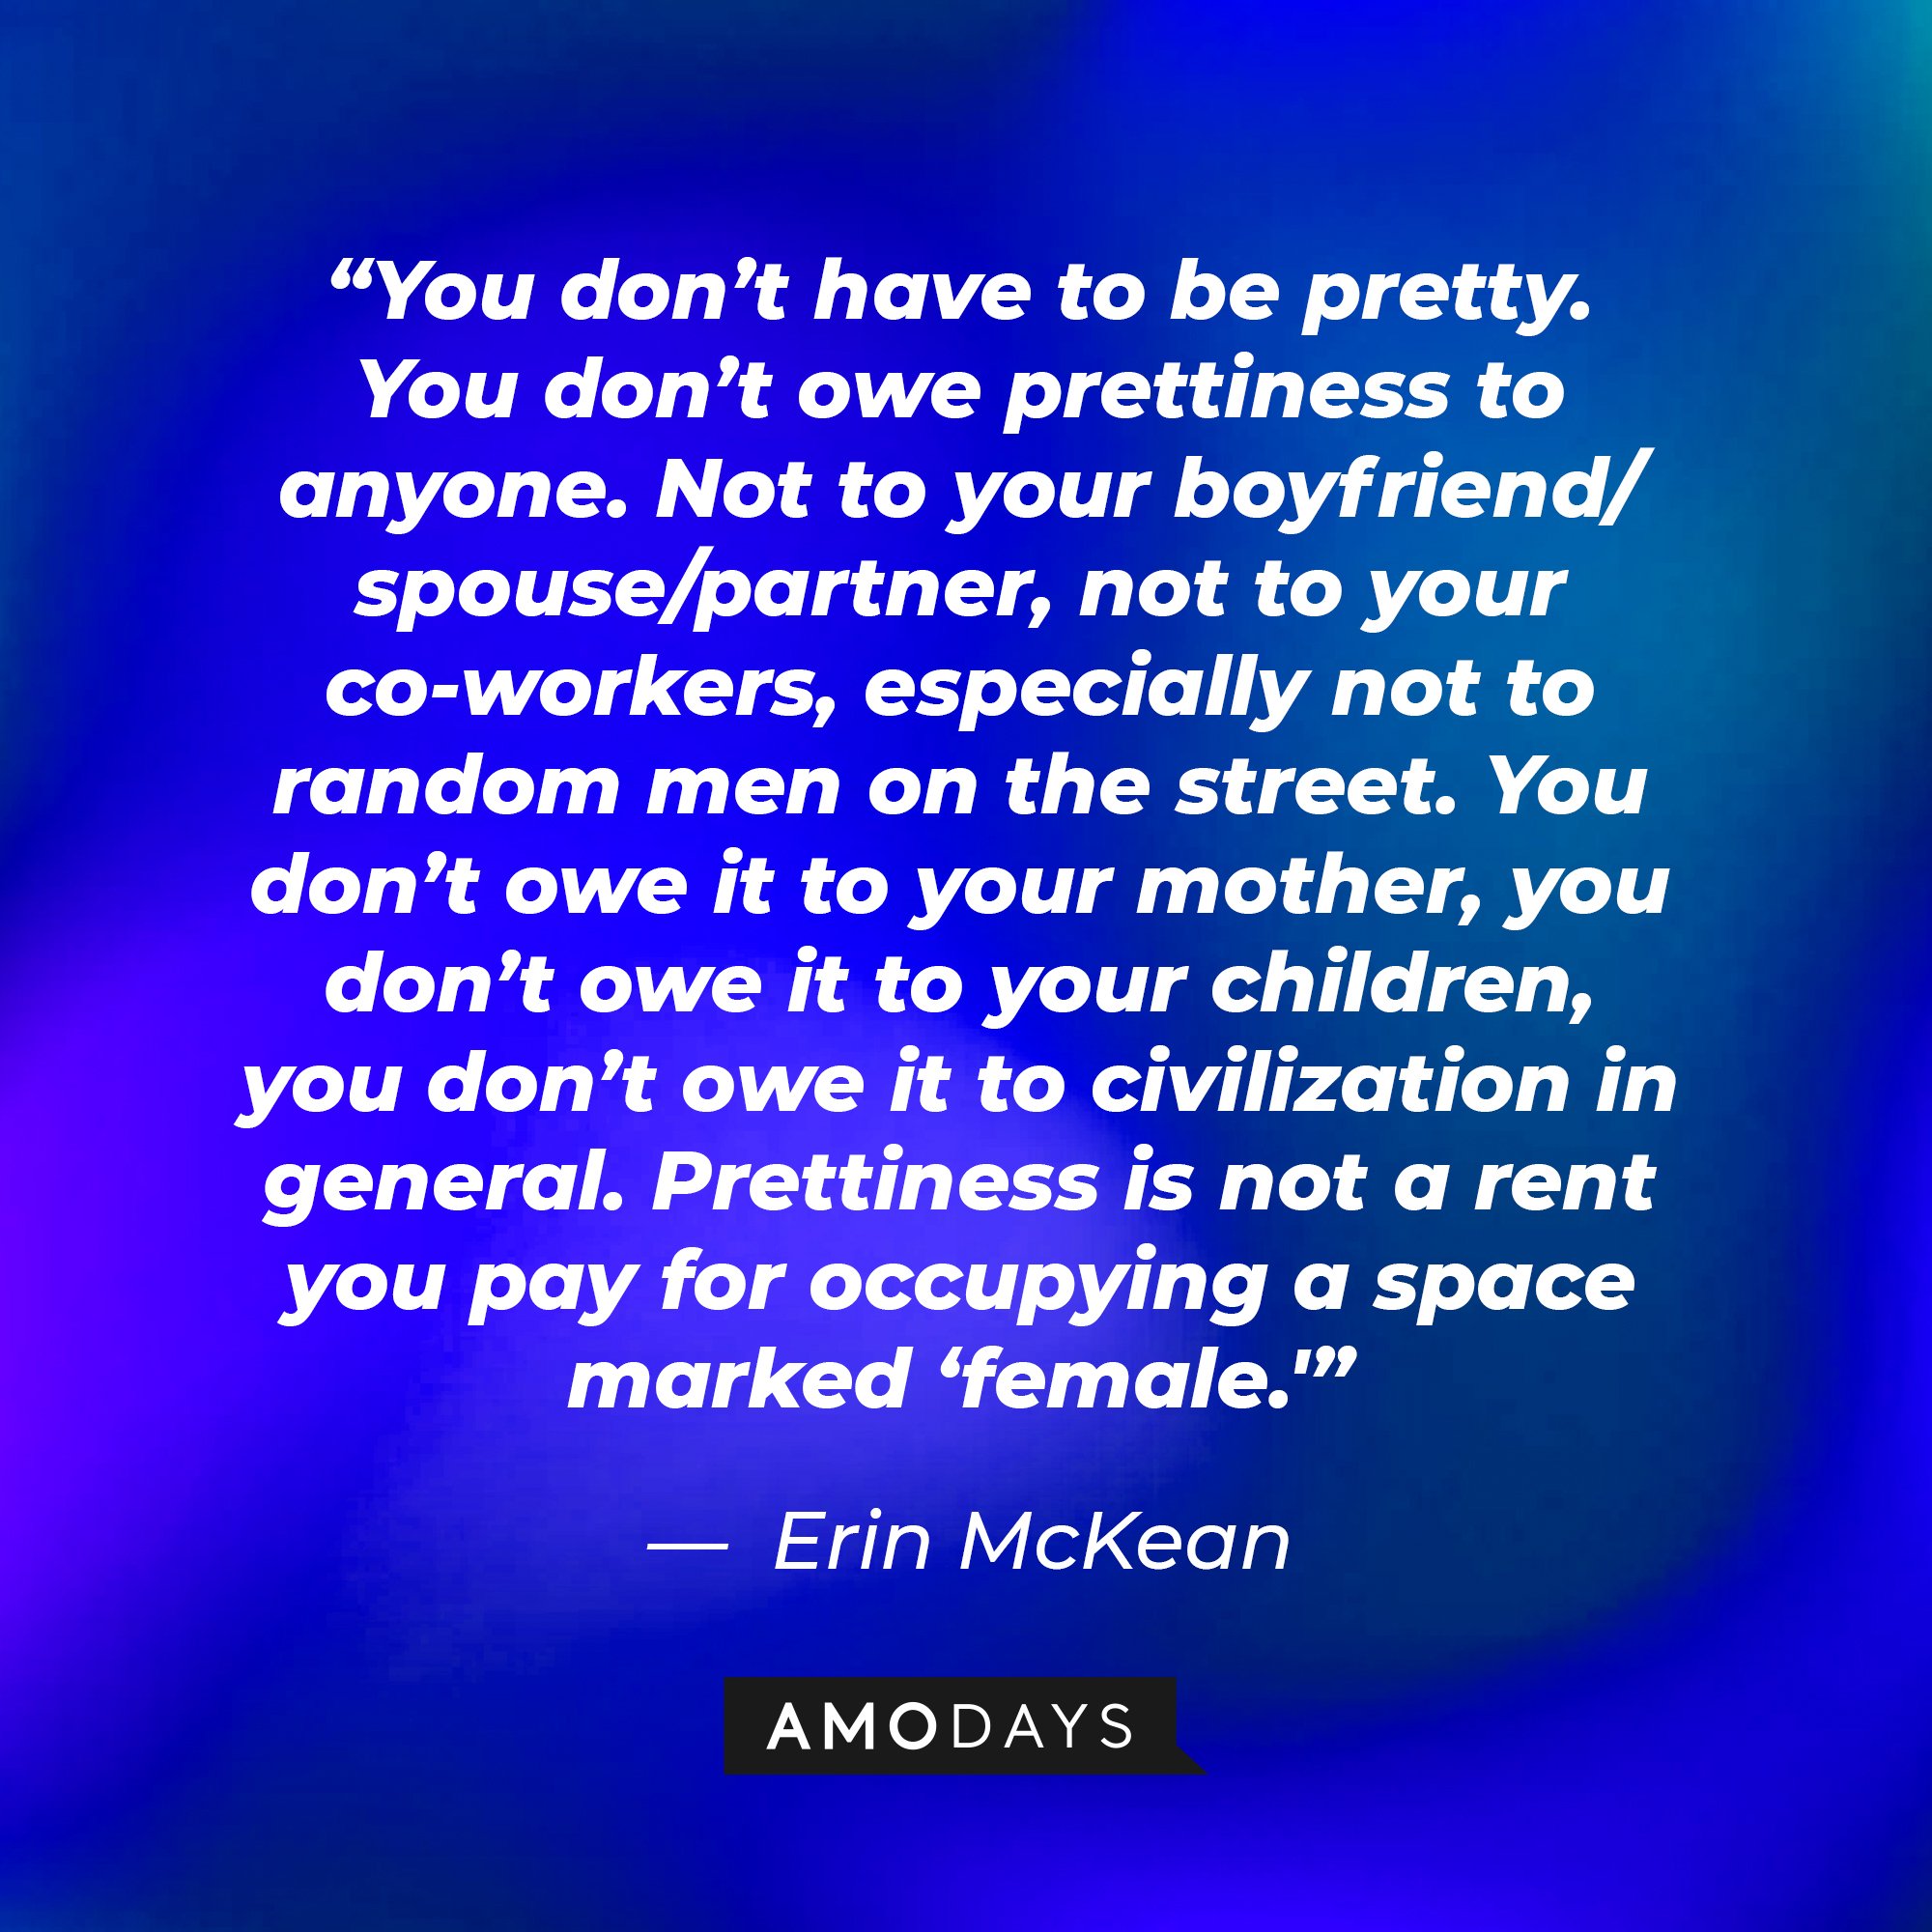 Erin McKean’s quote: “You don’t have to be pretty. You don’t owe prettiness to anyone. Not to your boyfriend/spouse/partner, not to your co-workers, especially not to random men on the street. You don’t owe it to your mother, you don’t owe it to your children, you don’t owe it to civilization in general. Prettiness is not a rent you pay for occupying a space marked ‘female.'” | Image: AmoDays